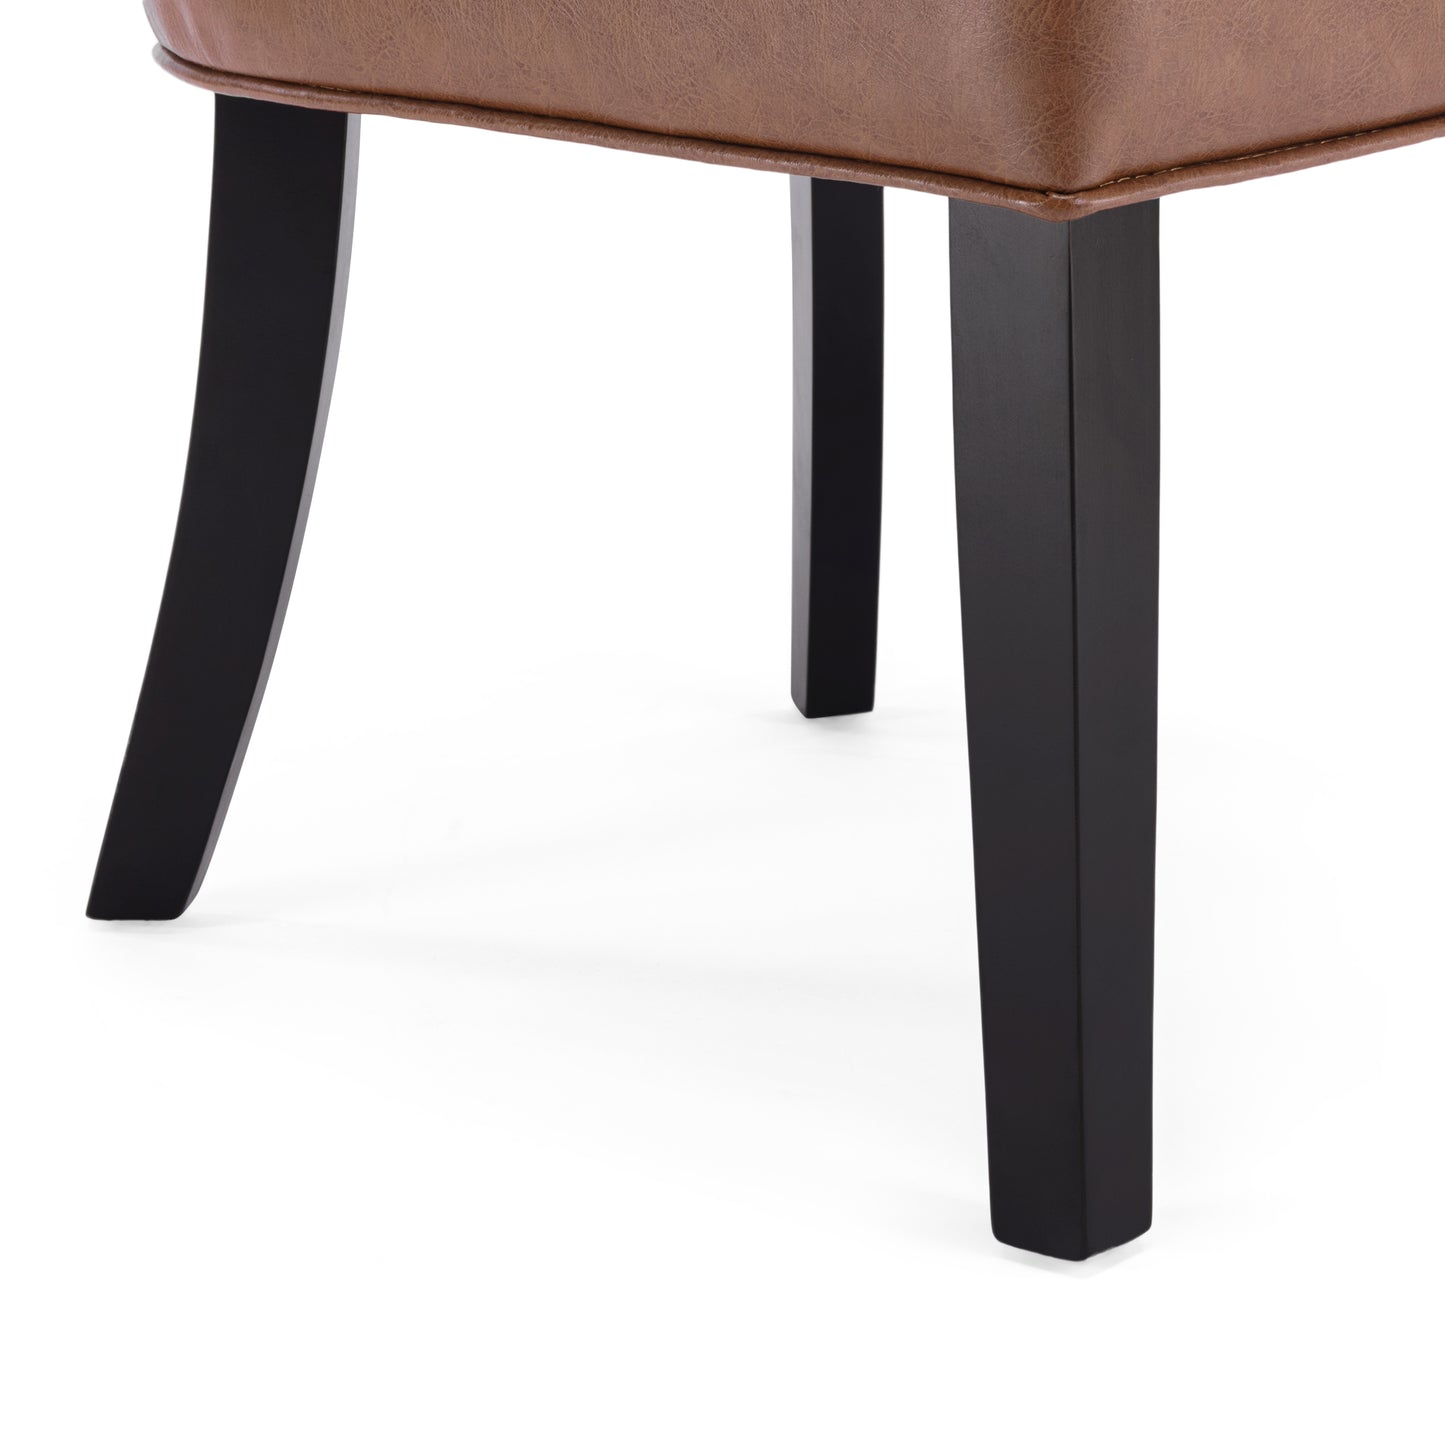 Edenbrook Contemporary Faux Leather Upholstered Dining Chairs, Set of 2, Cognac Brown and Matte Black